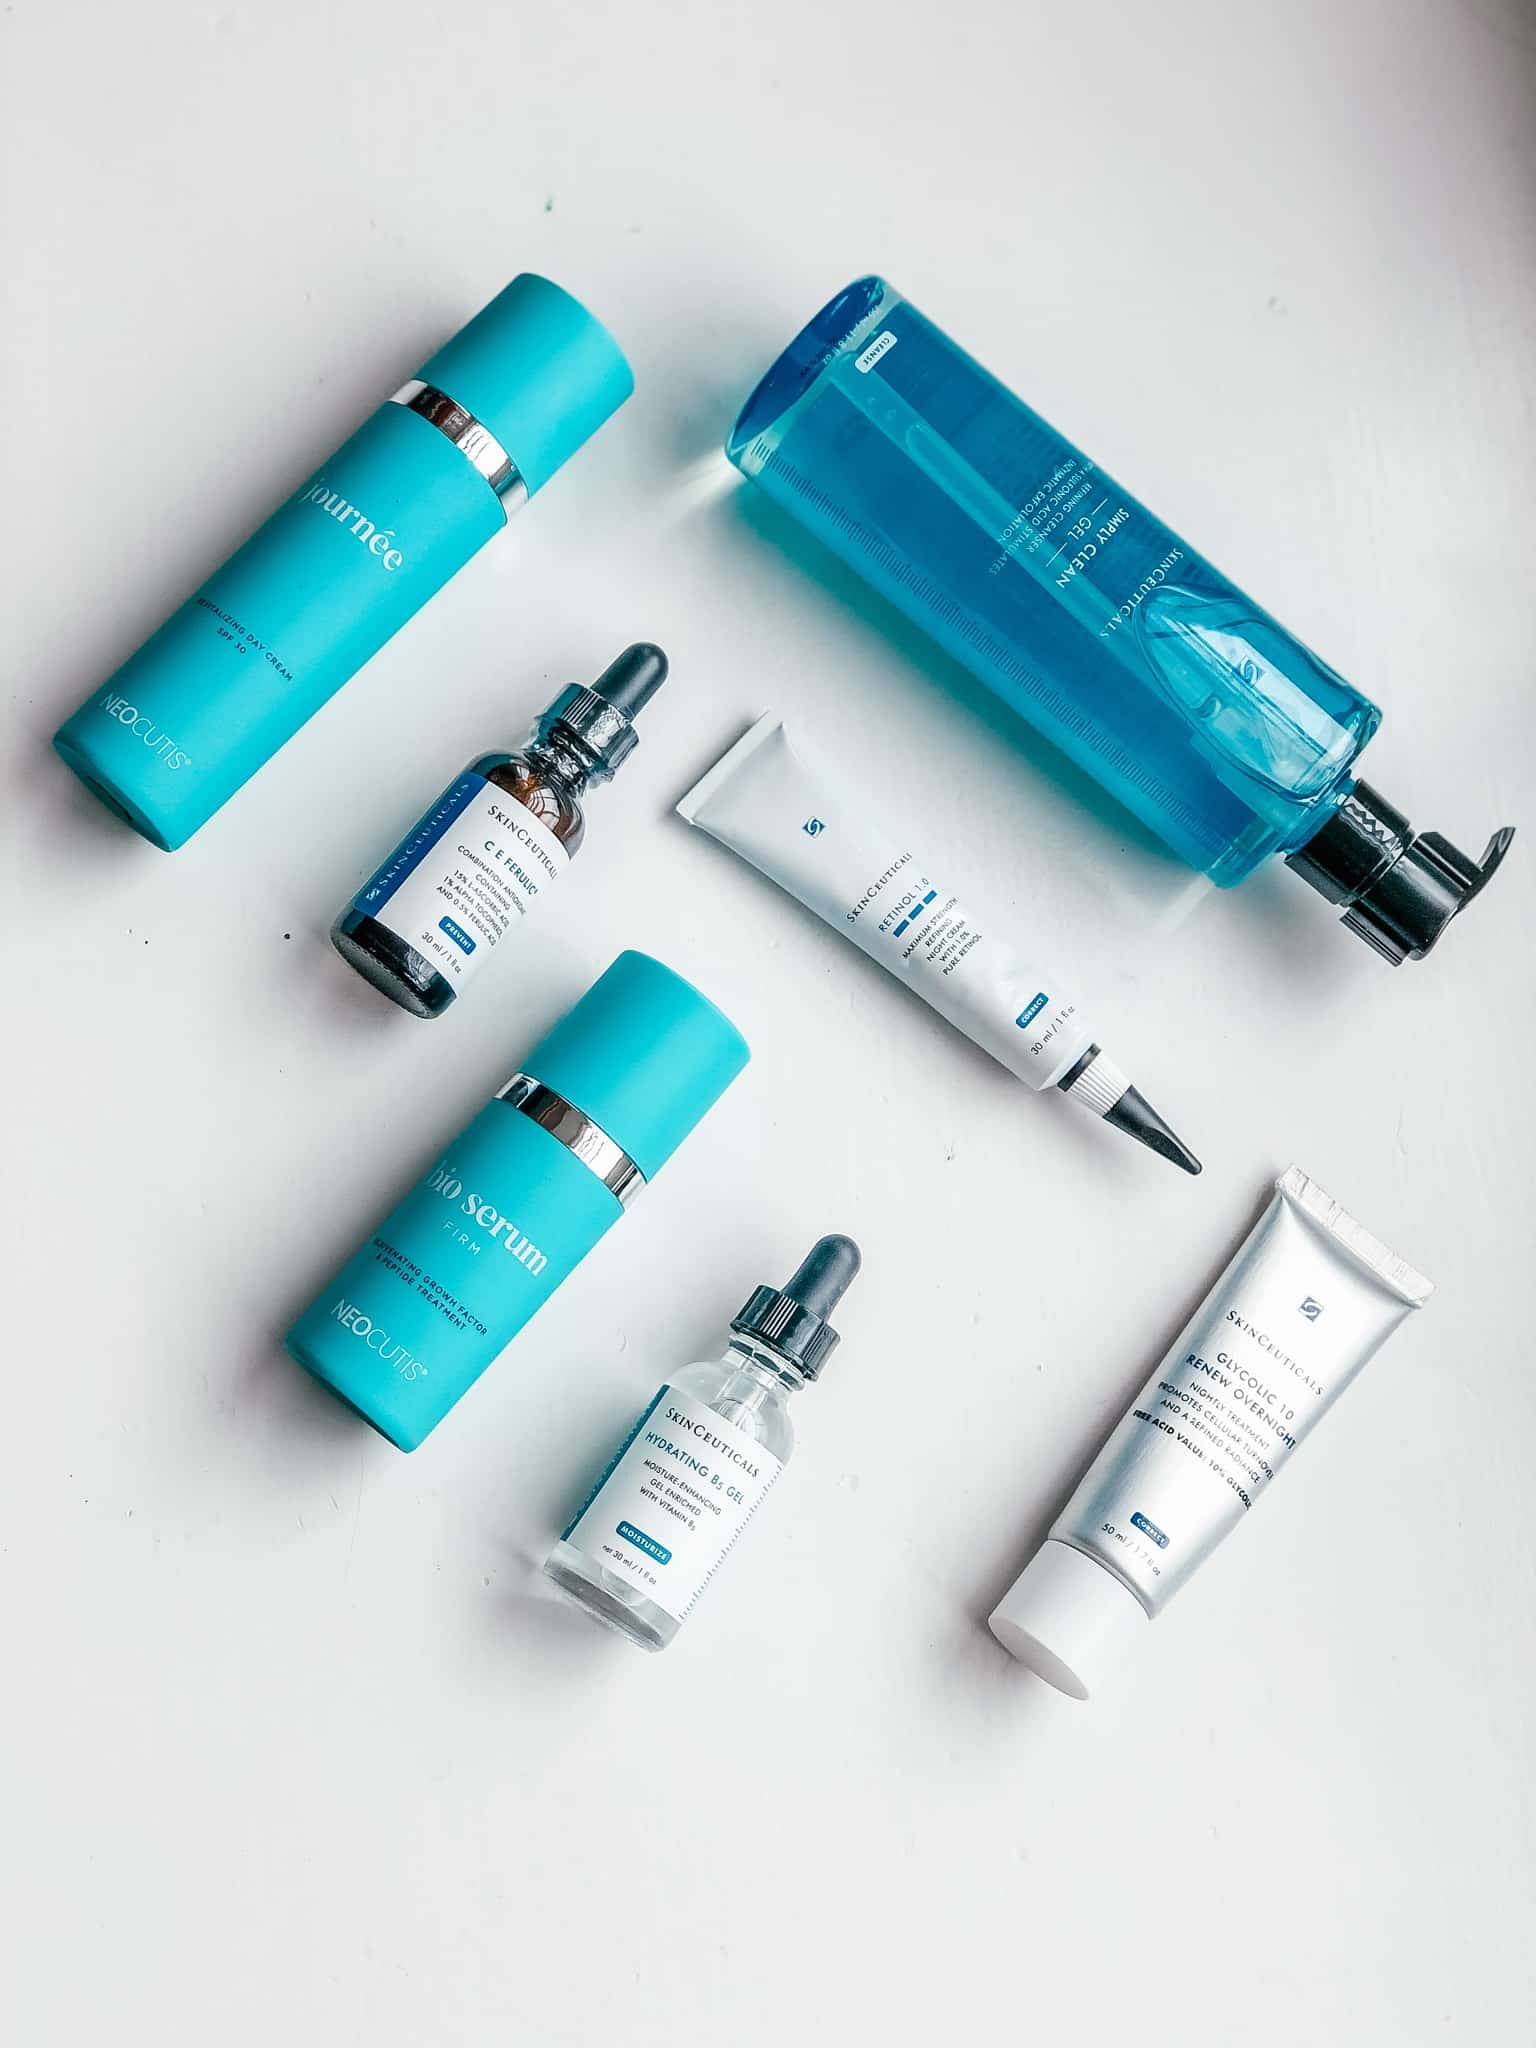 Why Medical-Grade-Skincare is better than Over-the-Counter